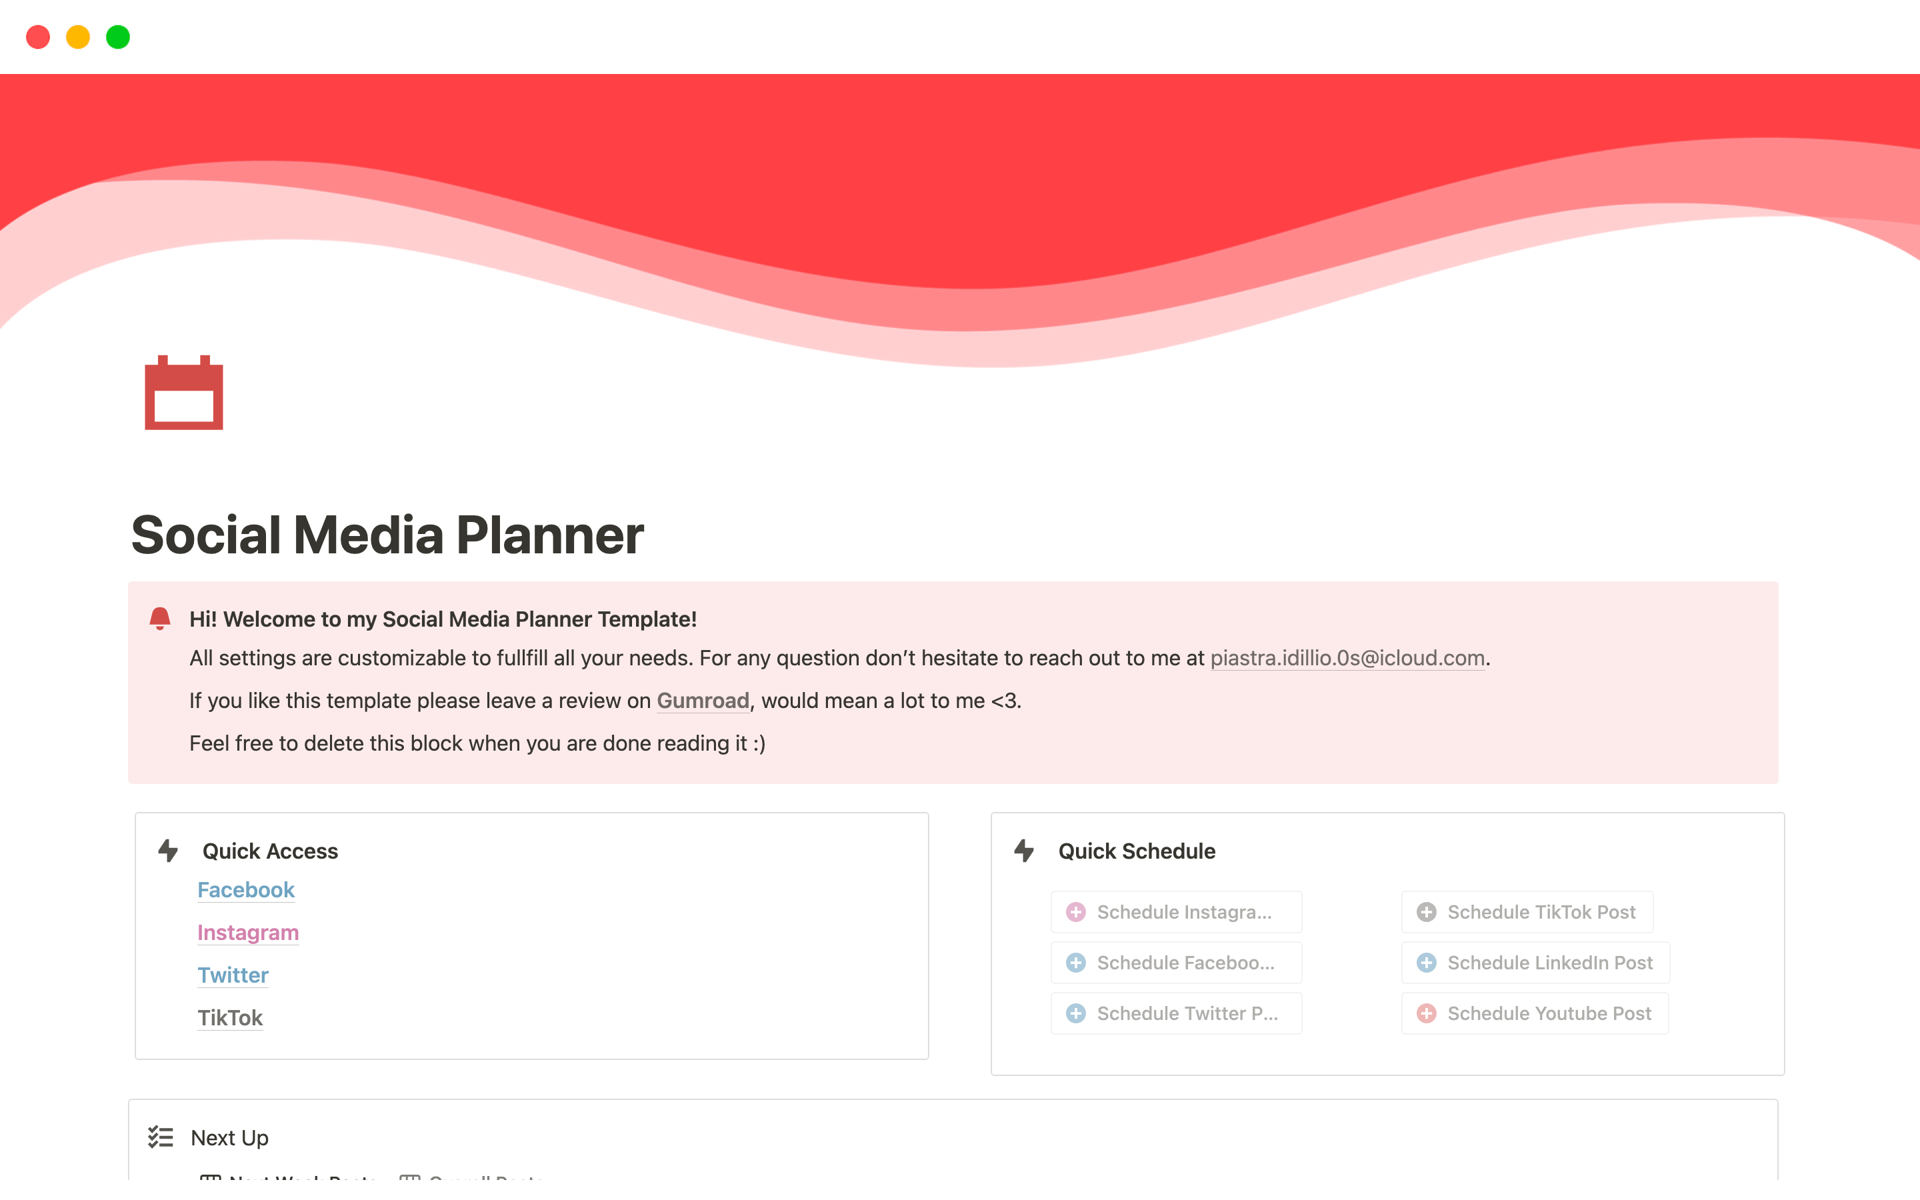 This template let you plan and organize your social media post schedule. 100% customizable in order to optimize your workflow and save you ton of time.